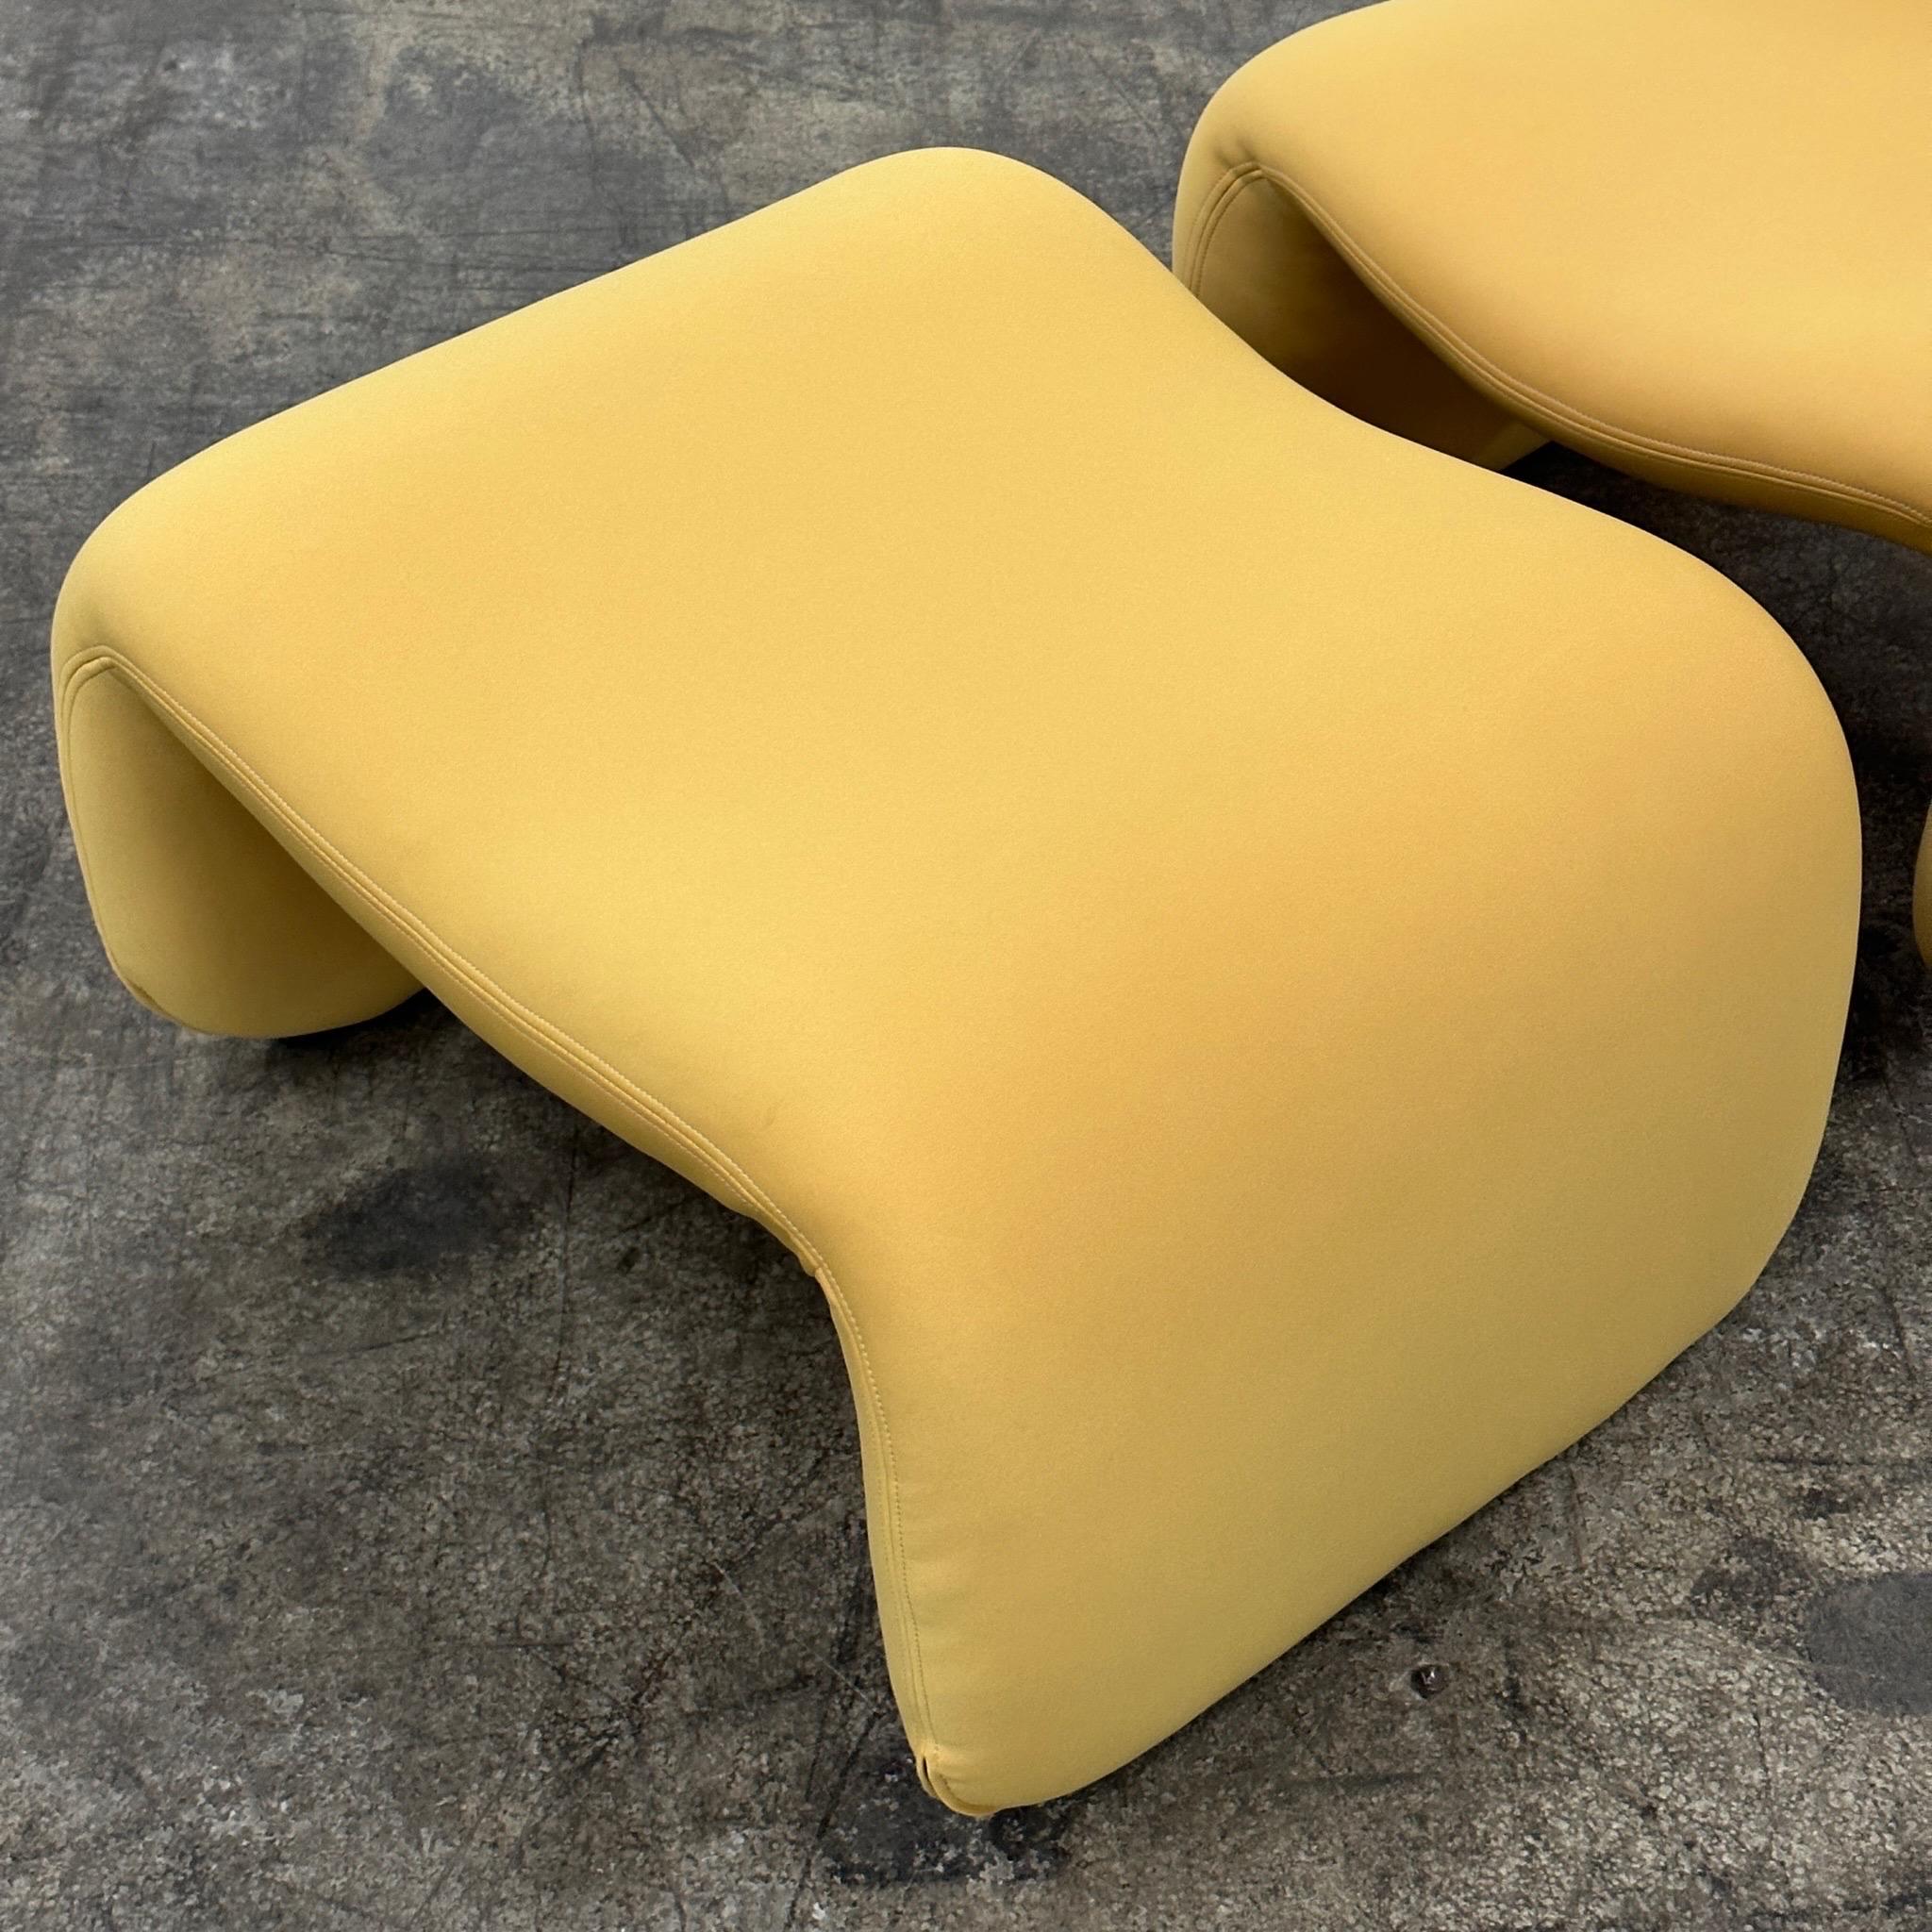 c. 1960s. Price is for the set. Extremely rare set made in France. As seen in 2001: A Space Odyssey. We reupholstered it and gave it new foam. The fabric is three stretch neoprene which is perfect for this curvy chair  